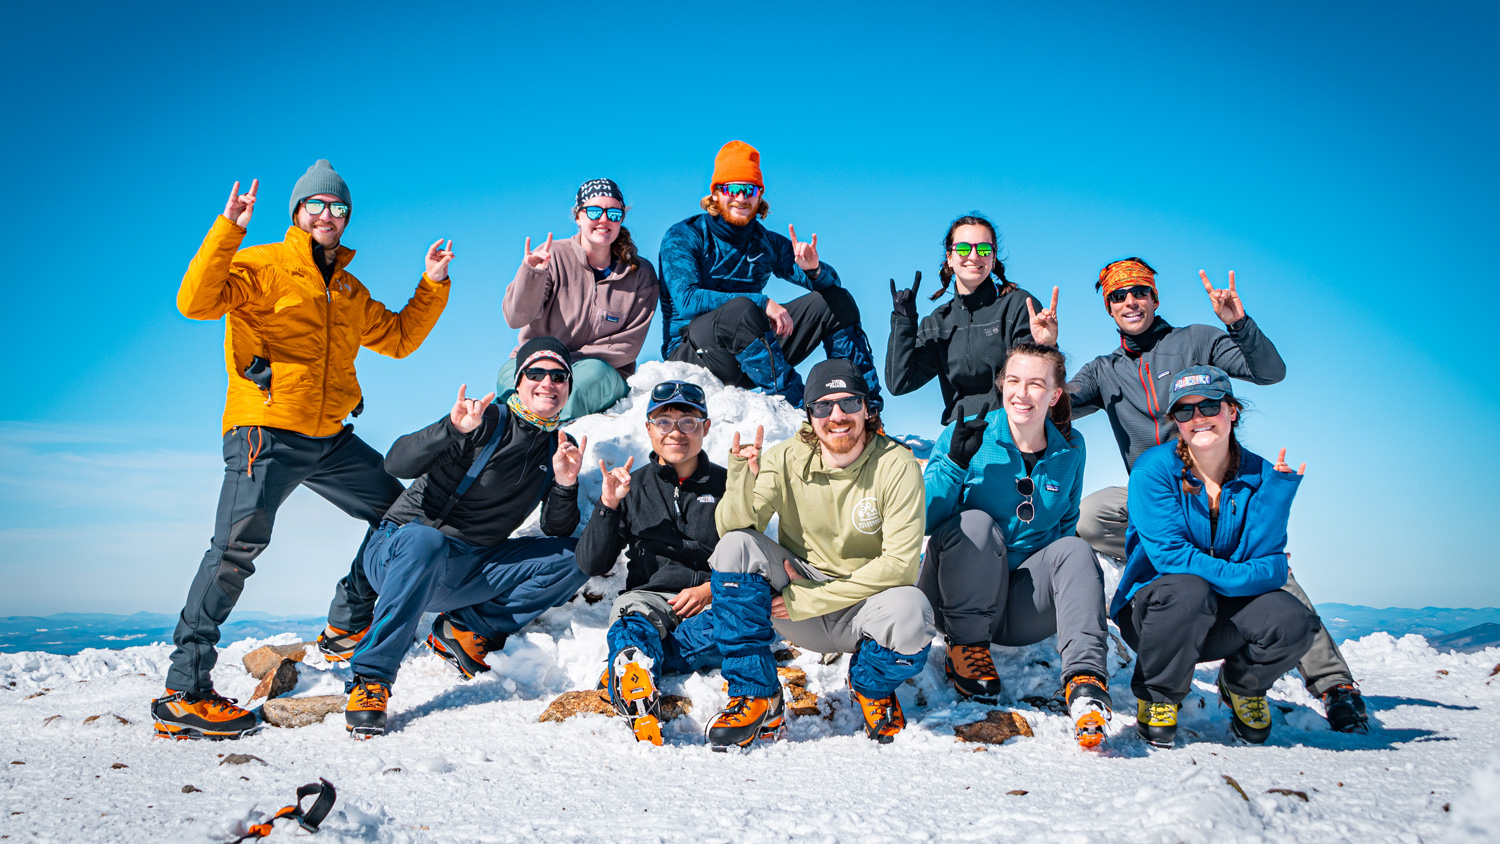 NC State Mountaineering students gather at a summit during last semester's ice climbing trip to the White Mountains of New Hampshire.